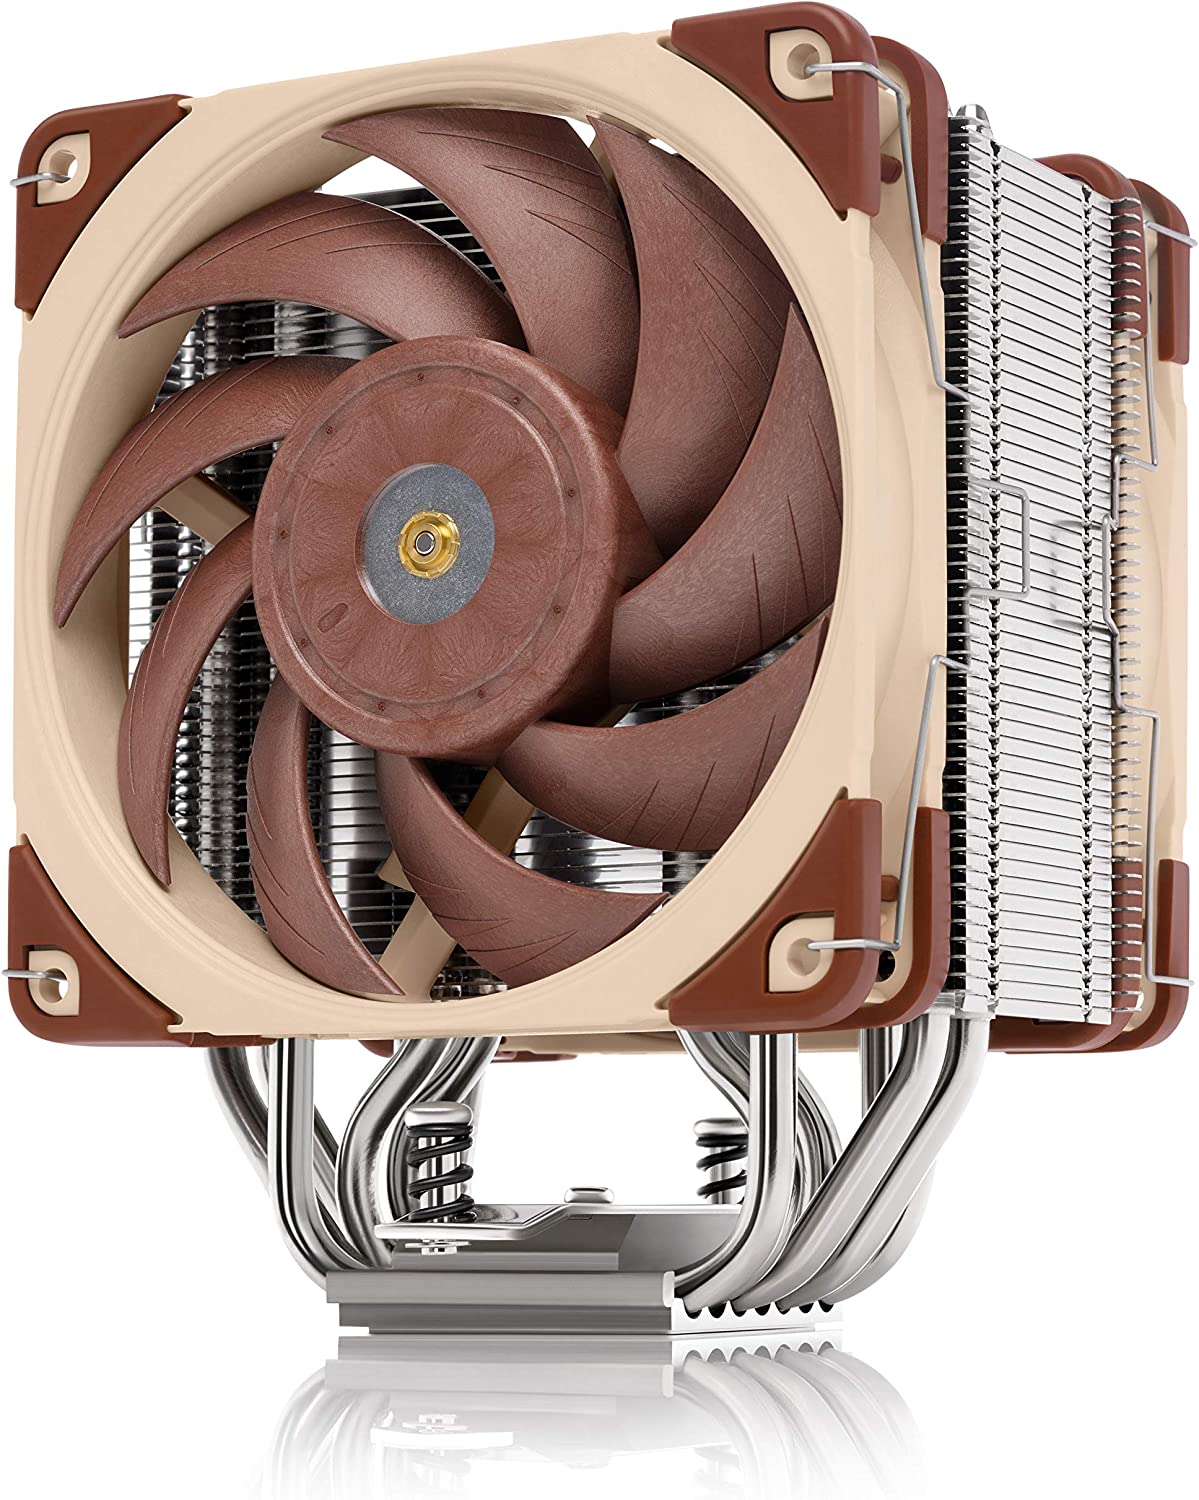 Noctua Updates the NH-U12S as the Redux Product Line's First CPU